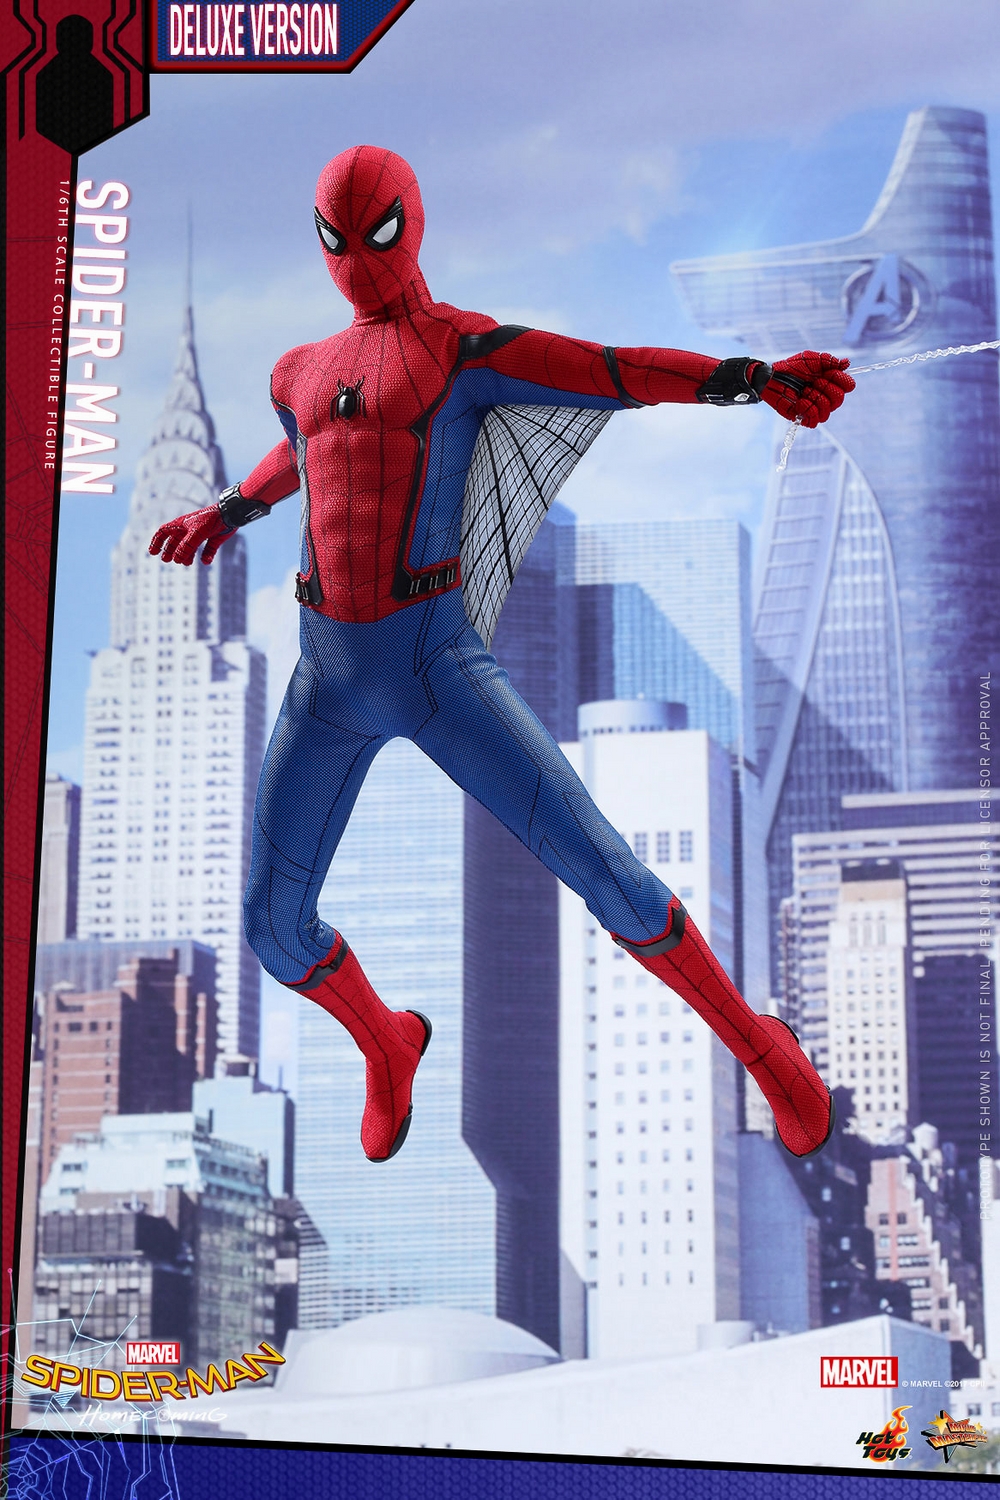 Hot-Toys-MMS426-Spider-Man-Homecoming-Deluxe-005.jpg